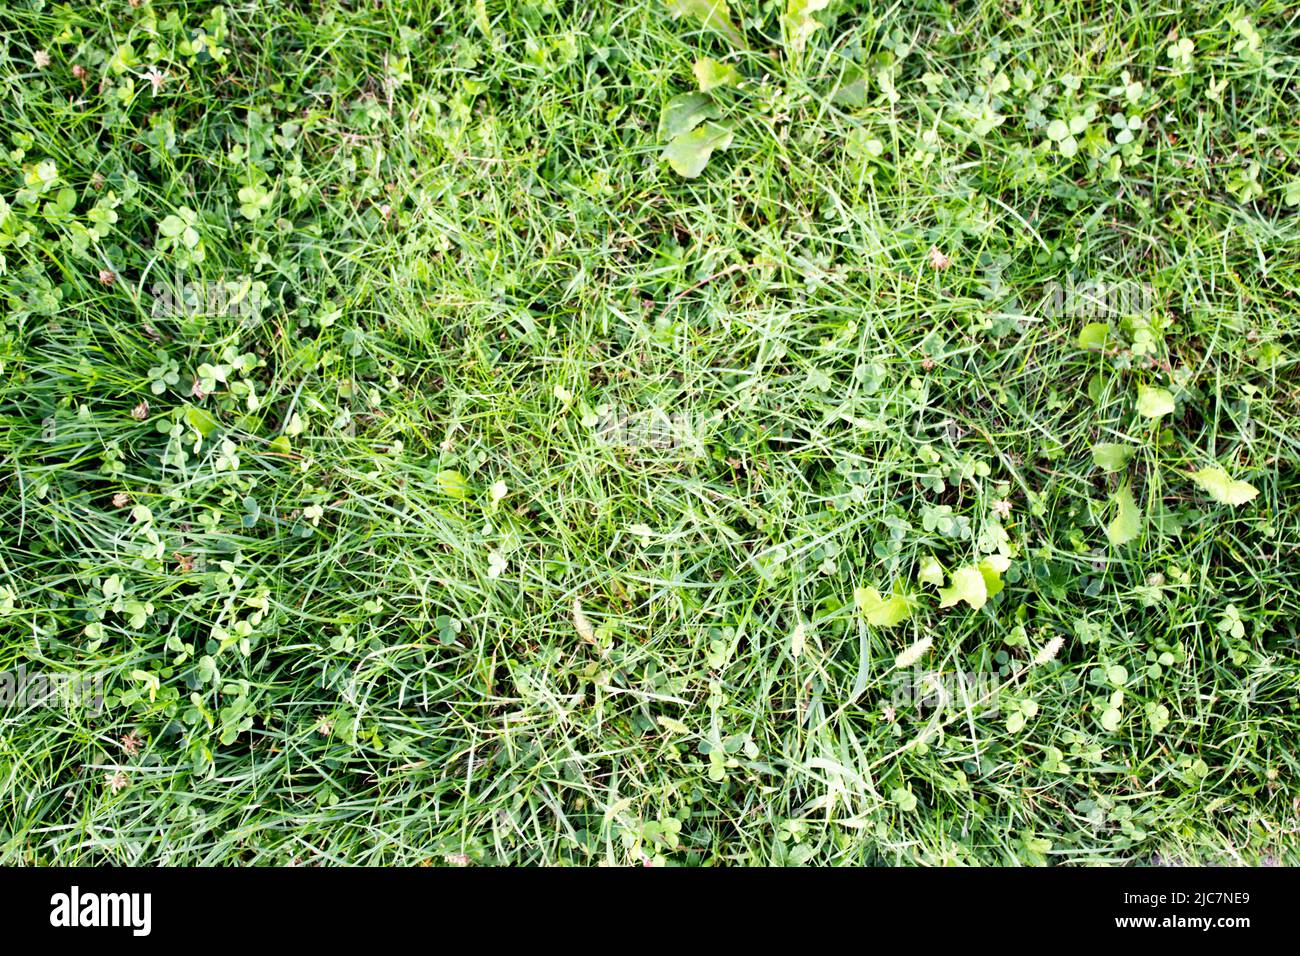 Green grass seamless texture. Seamless in only horizontal dimension Stock Photo